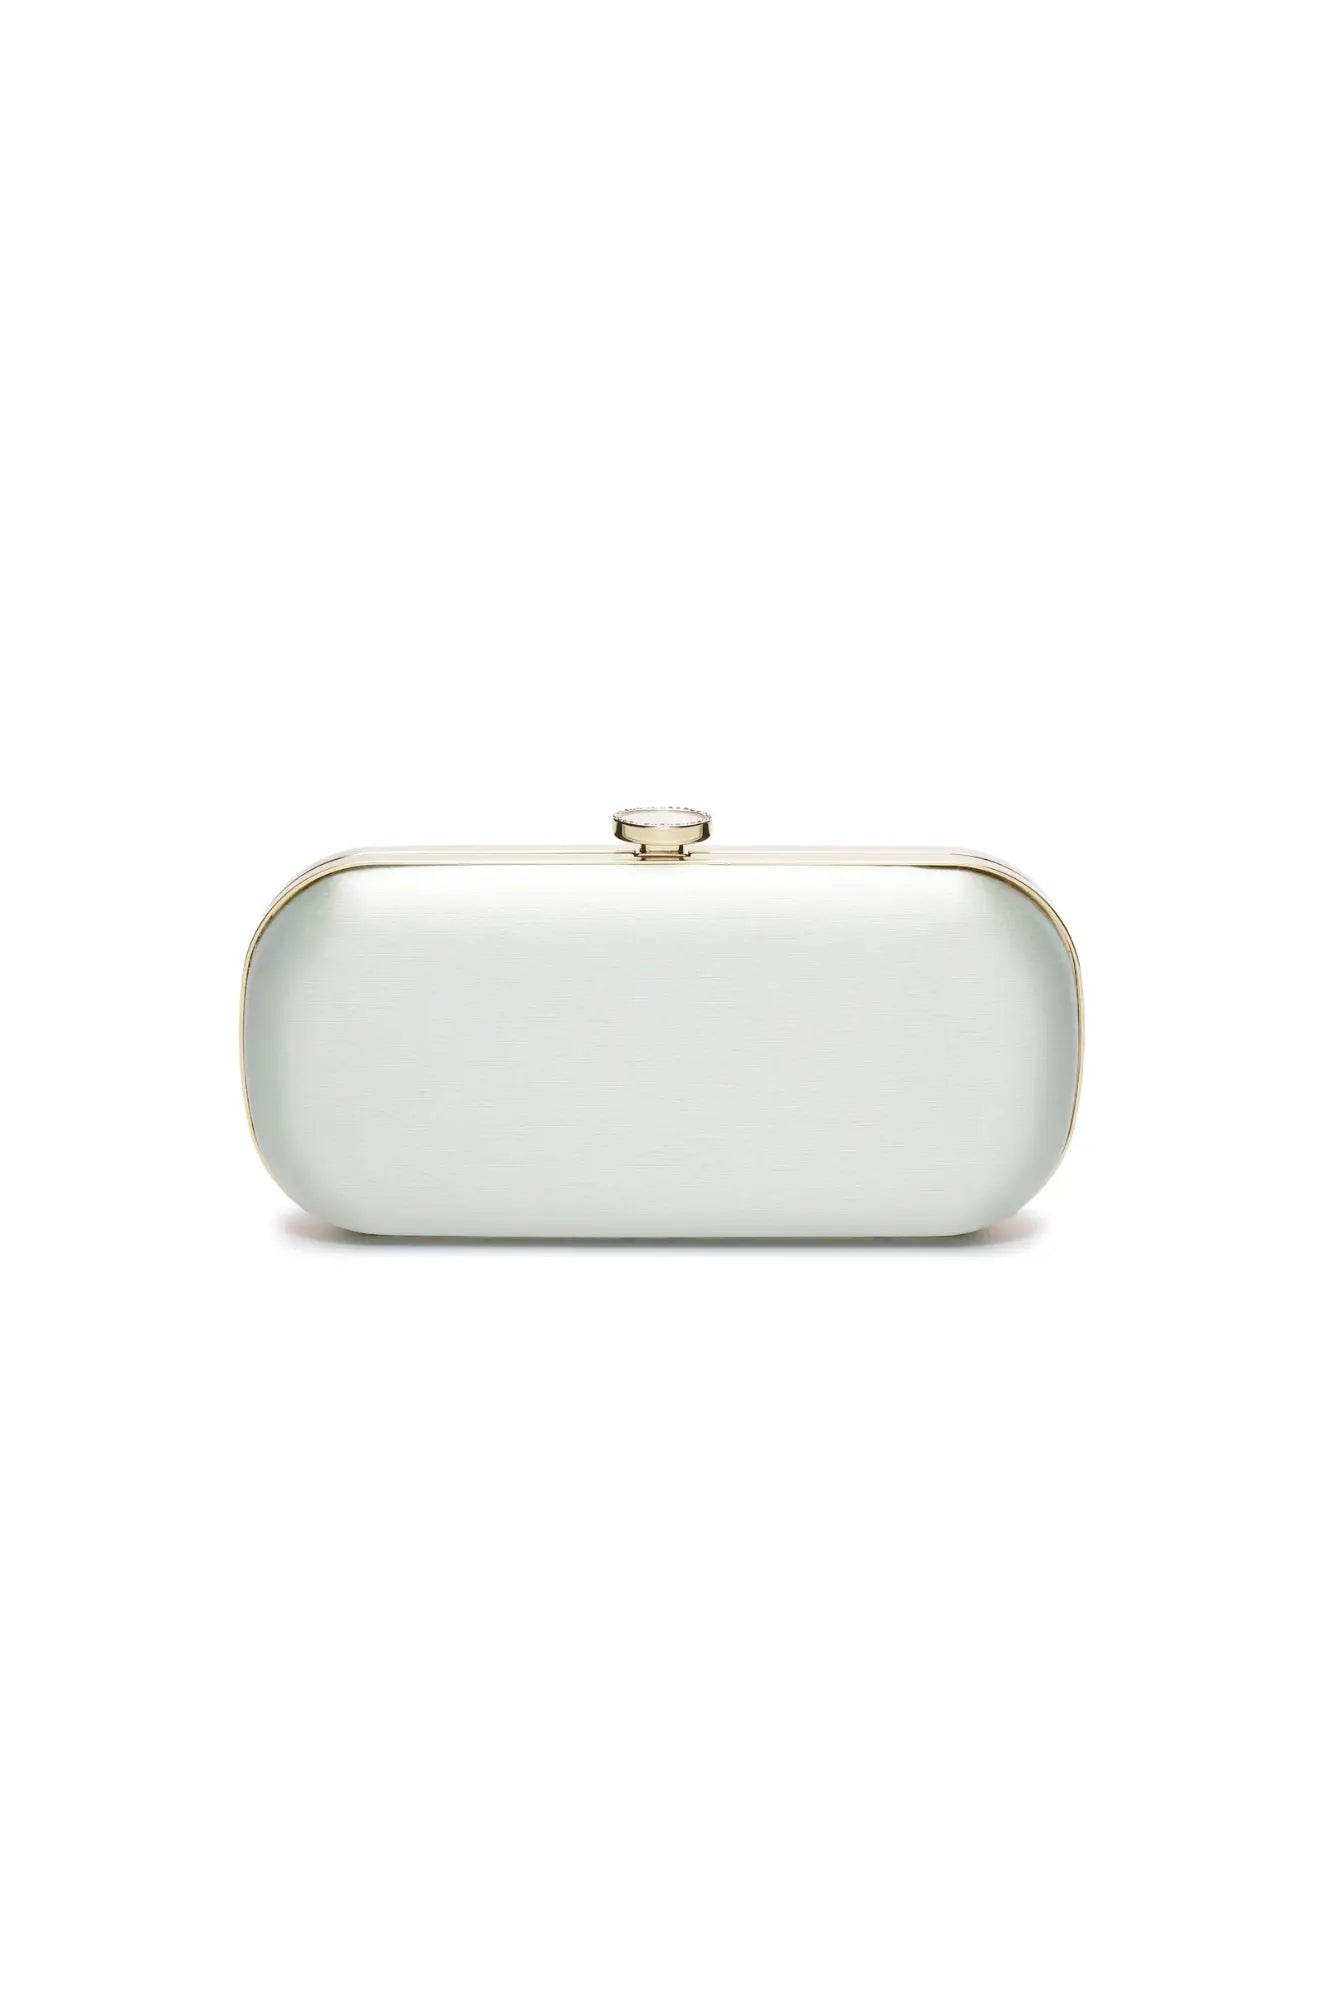 Elegant Bella Clutch Sage Green Satin Petite bridal clutch purse by The Bella Rosa Collection isolated on a white background.